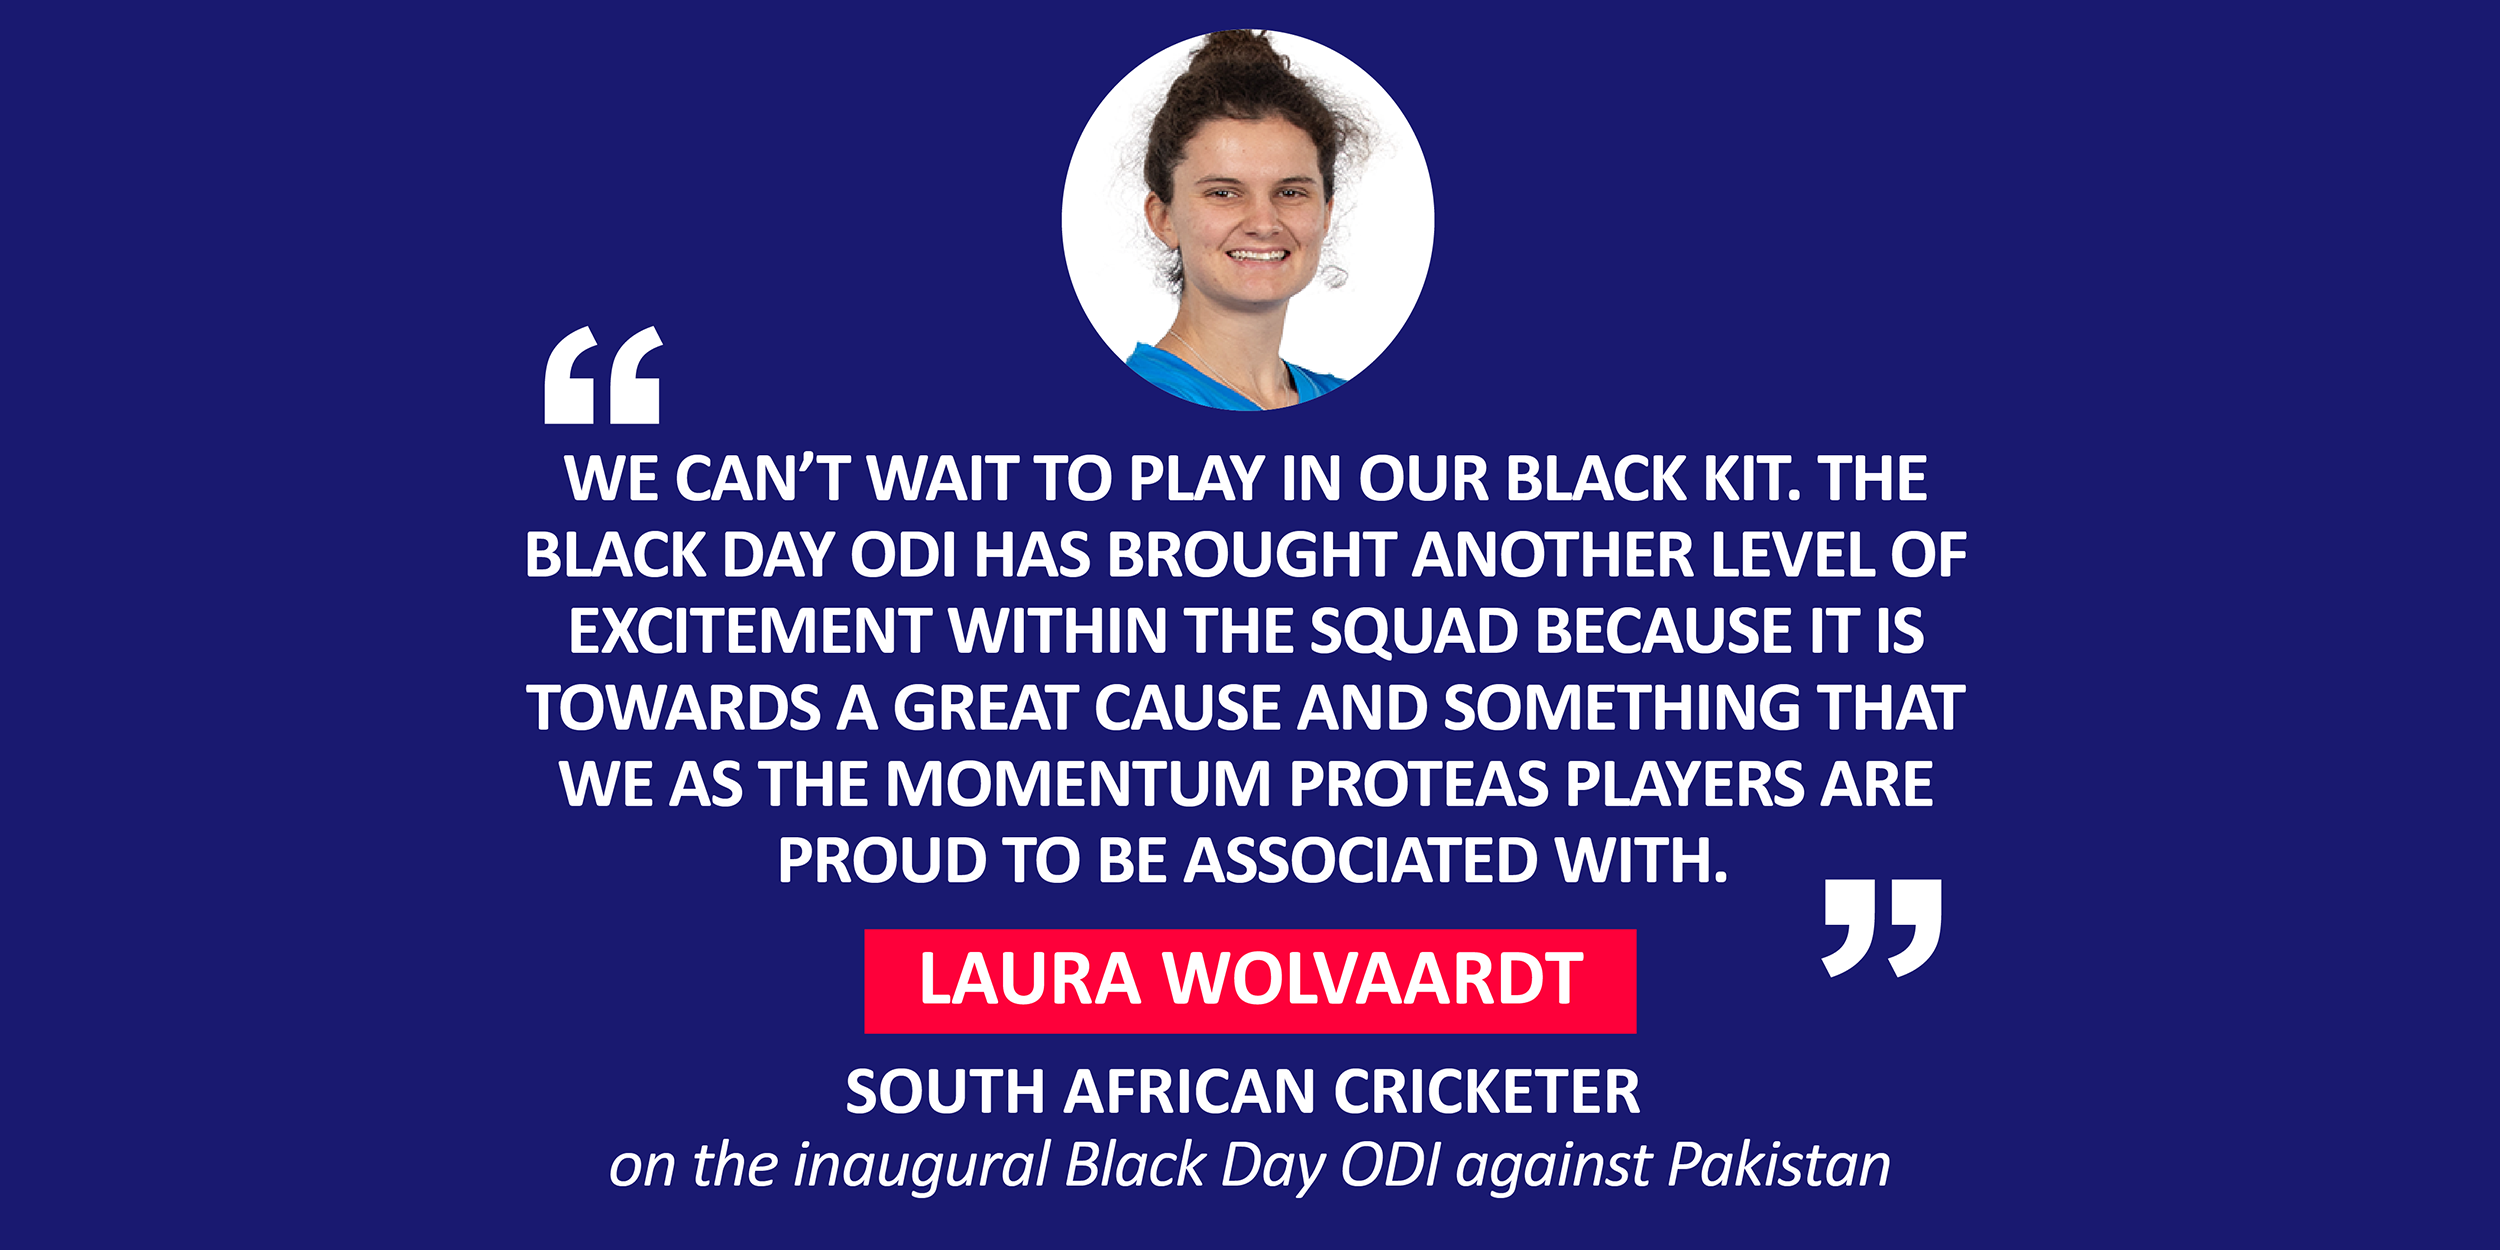 Laura Wolvaardt, South African Cricketer on the inaugural Black Day ODI against Pakistan